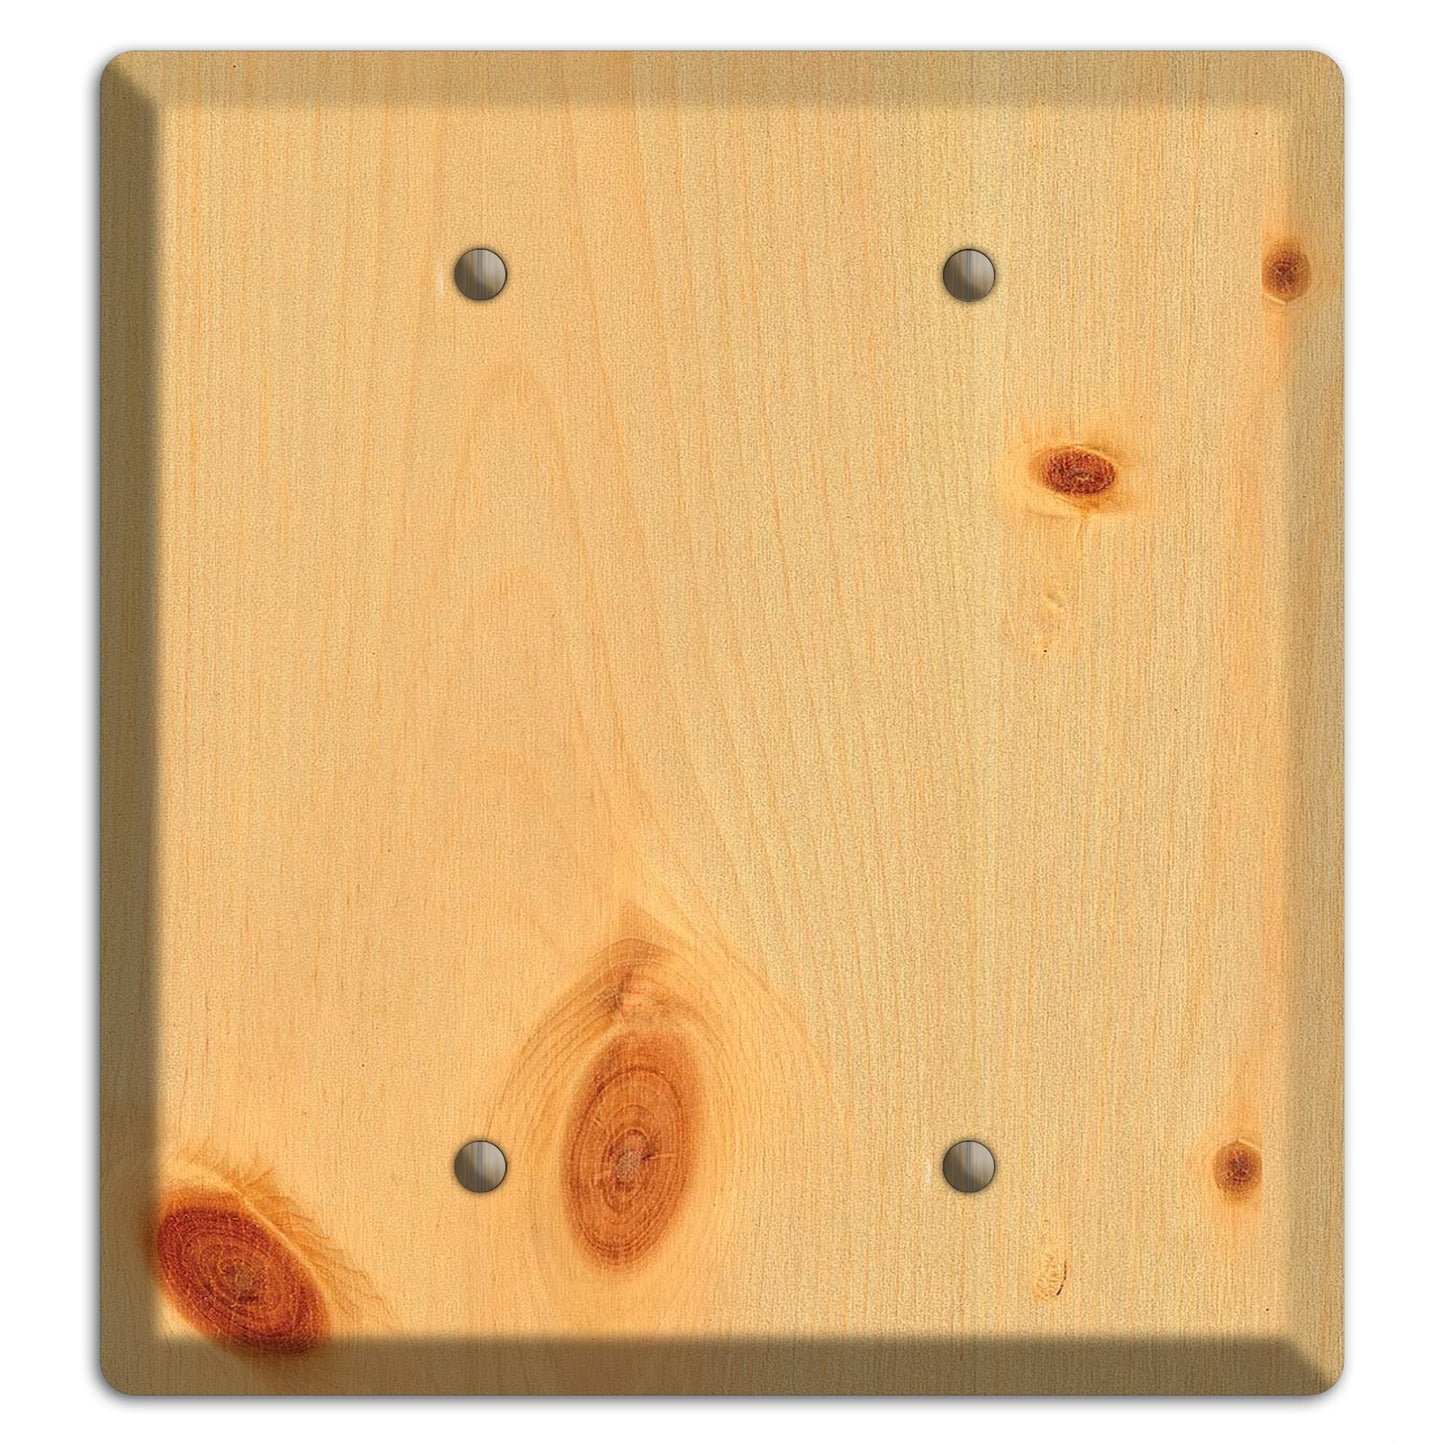 Pine Wood Double Blank Cover Plate